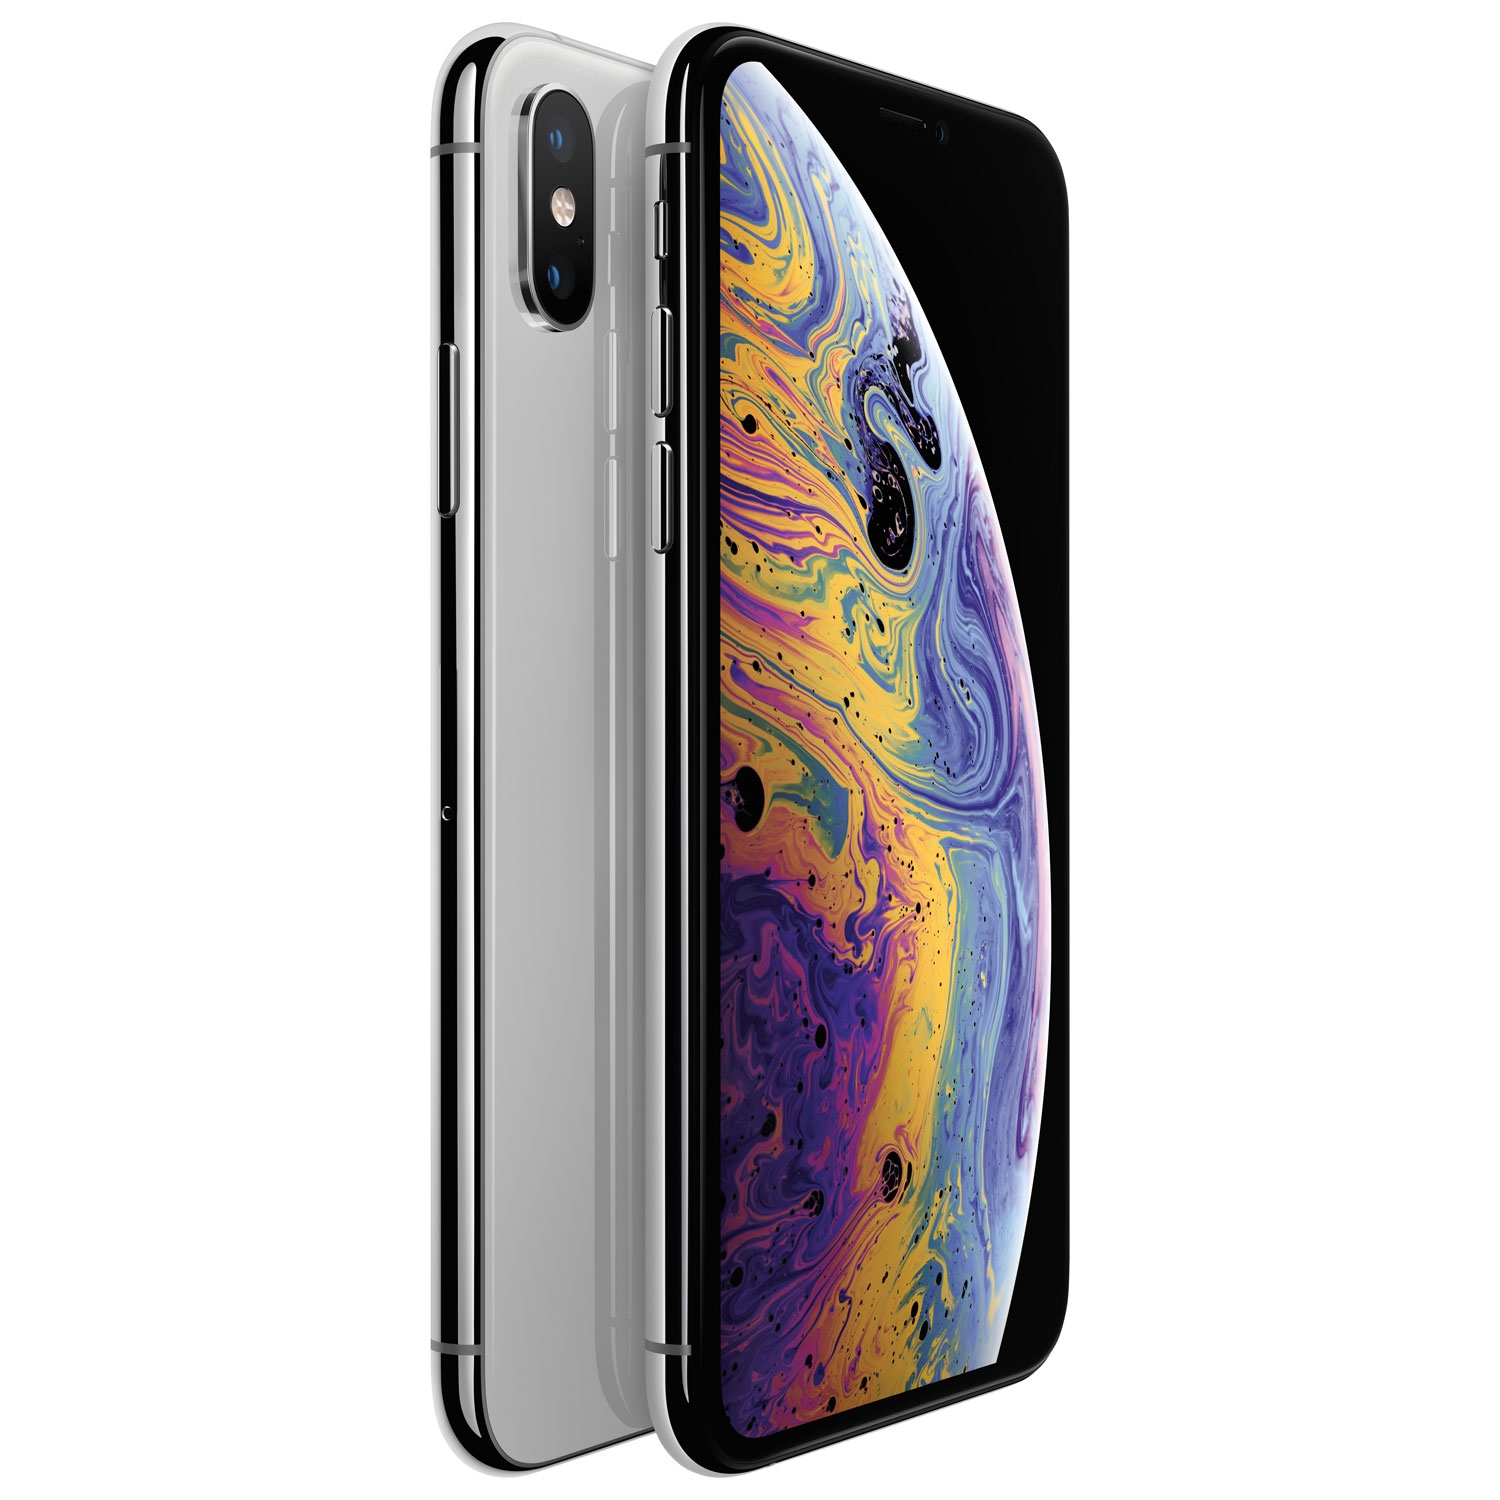 Refurbished (Excellent) - Apple iPhone XS Max 64GB Smartphone - Silver - Unlocked - Certified Refurbished